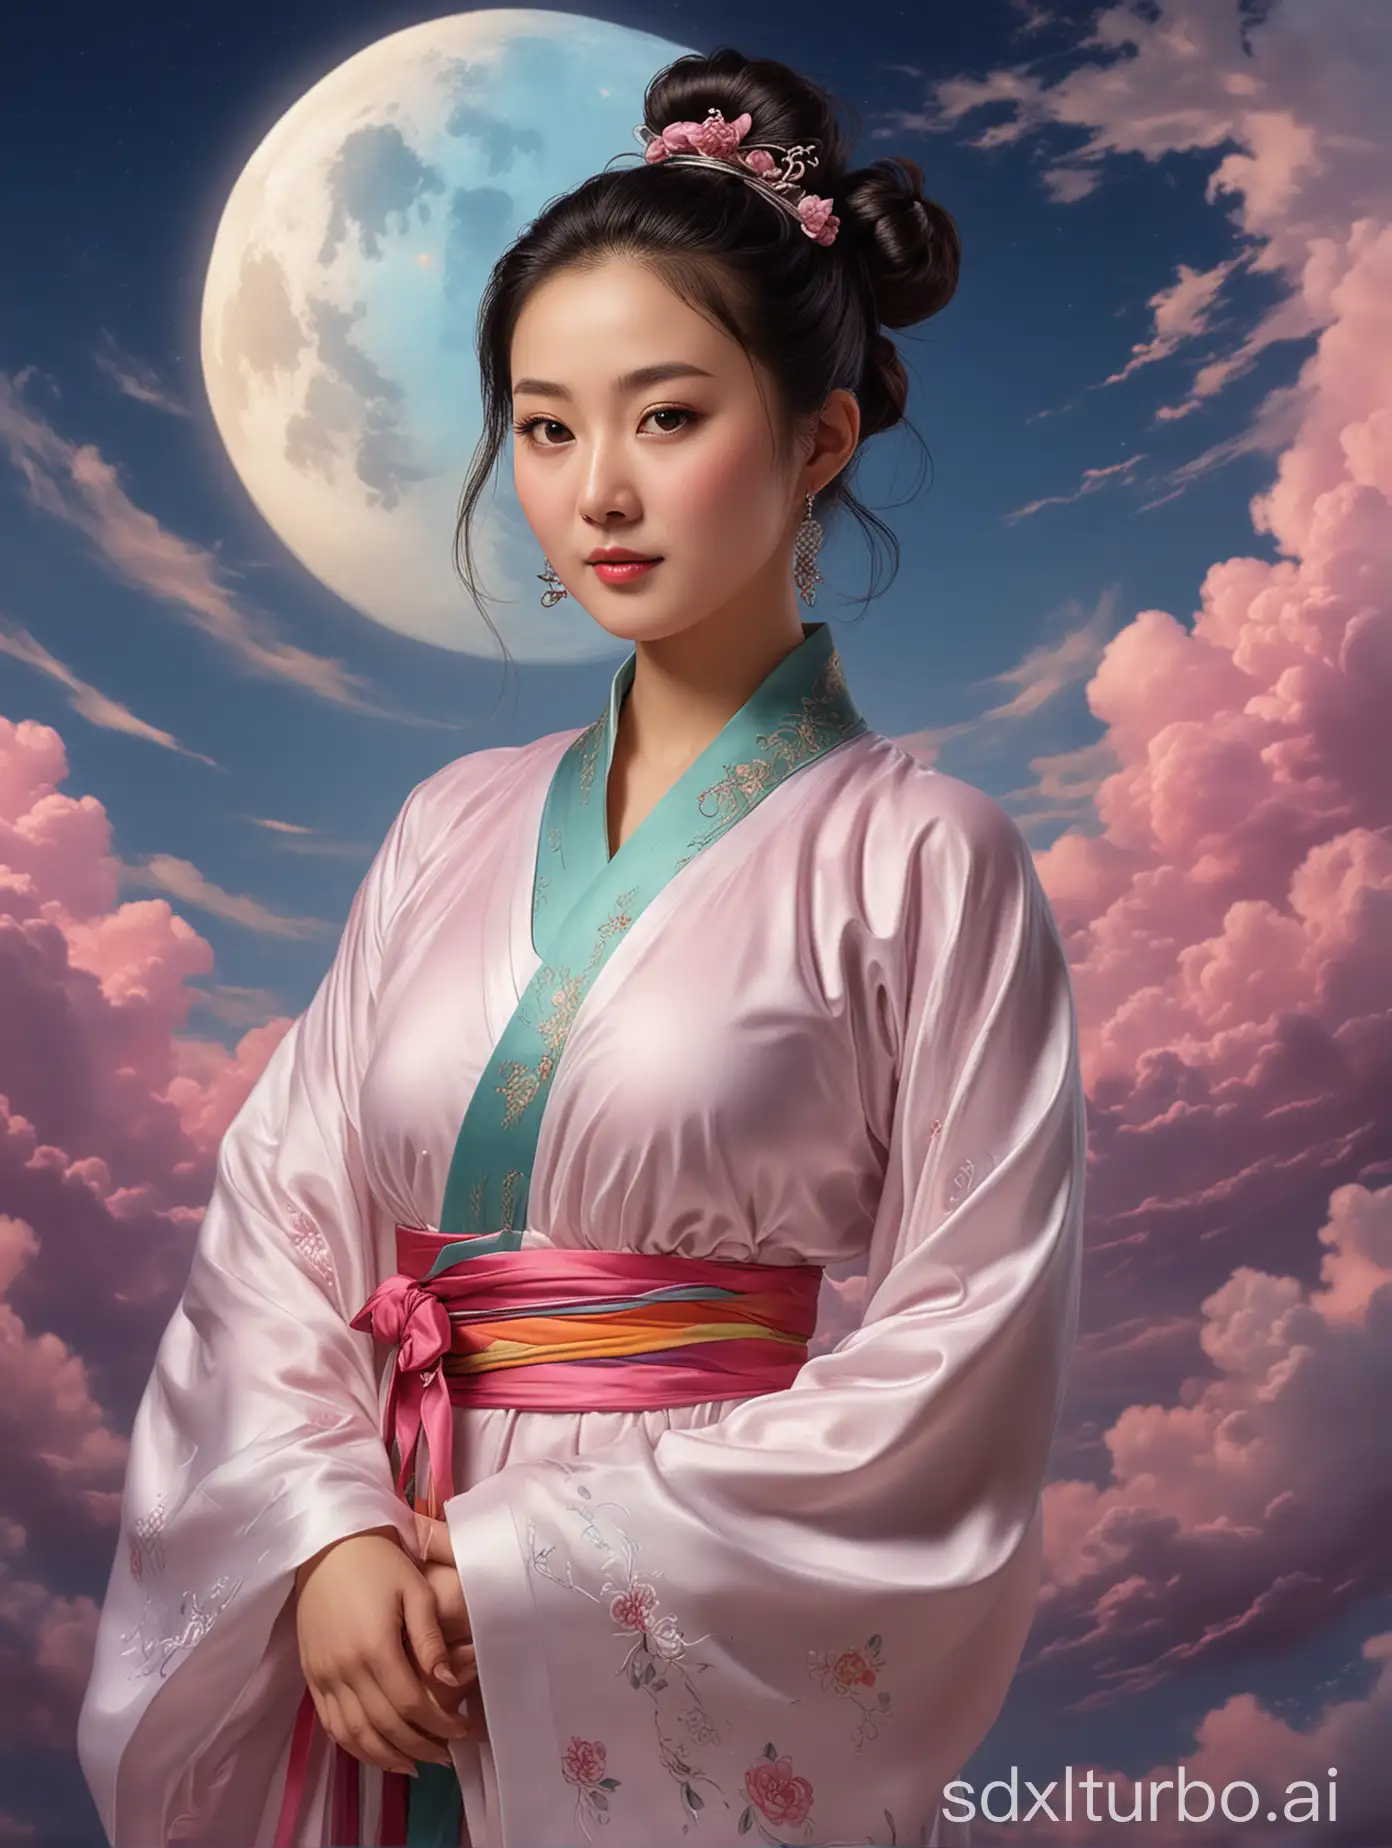 32YearOld-Chinese-Woman-in-Tianshan-Dongjiu-Style-with-Clear-Moon-and-Colorful-Clouds